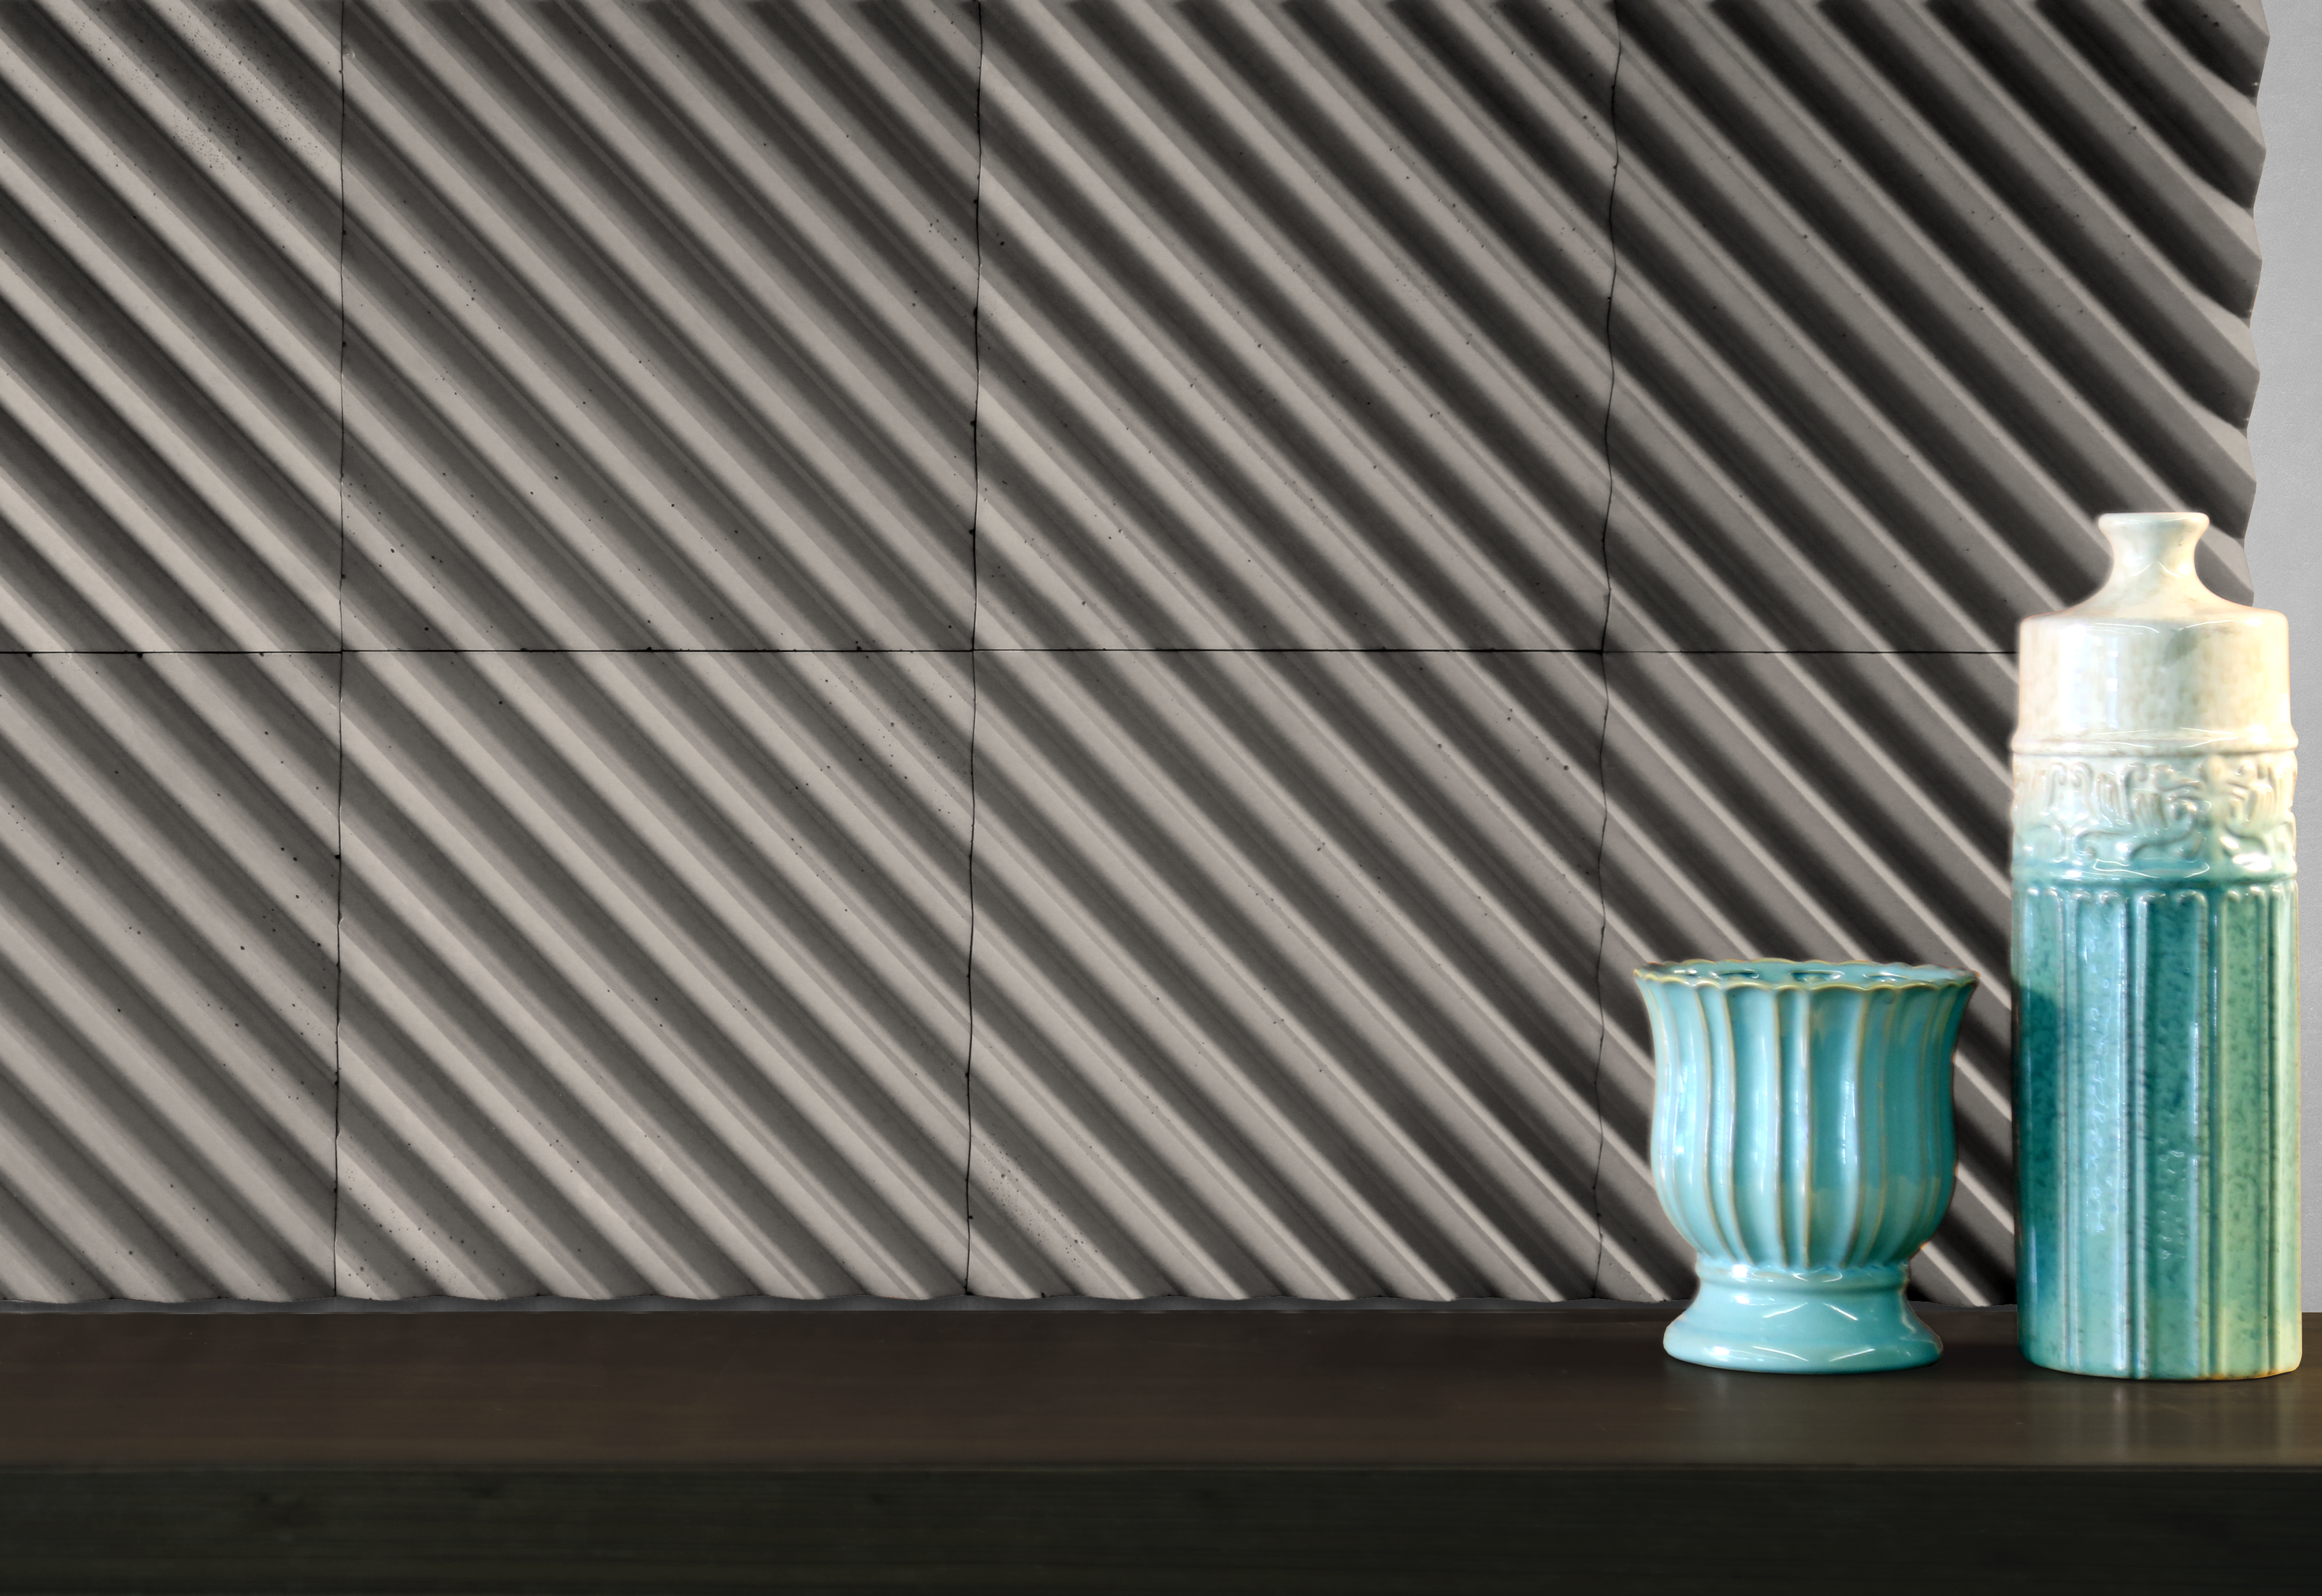 Designer wall tiles in high performance concrete